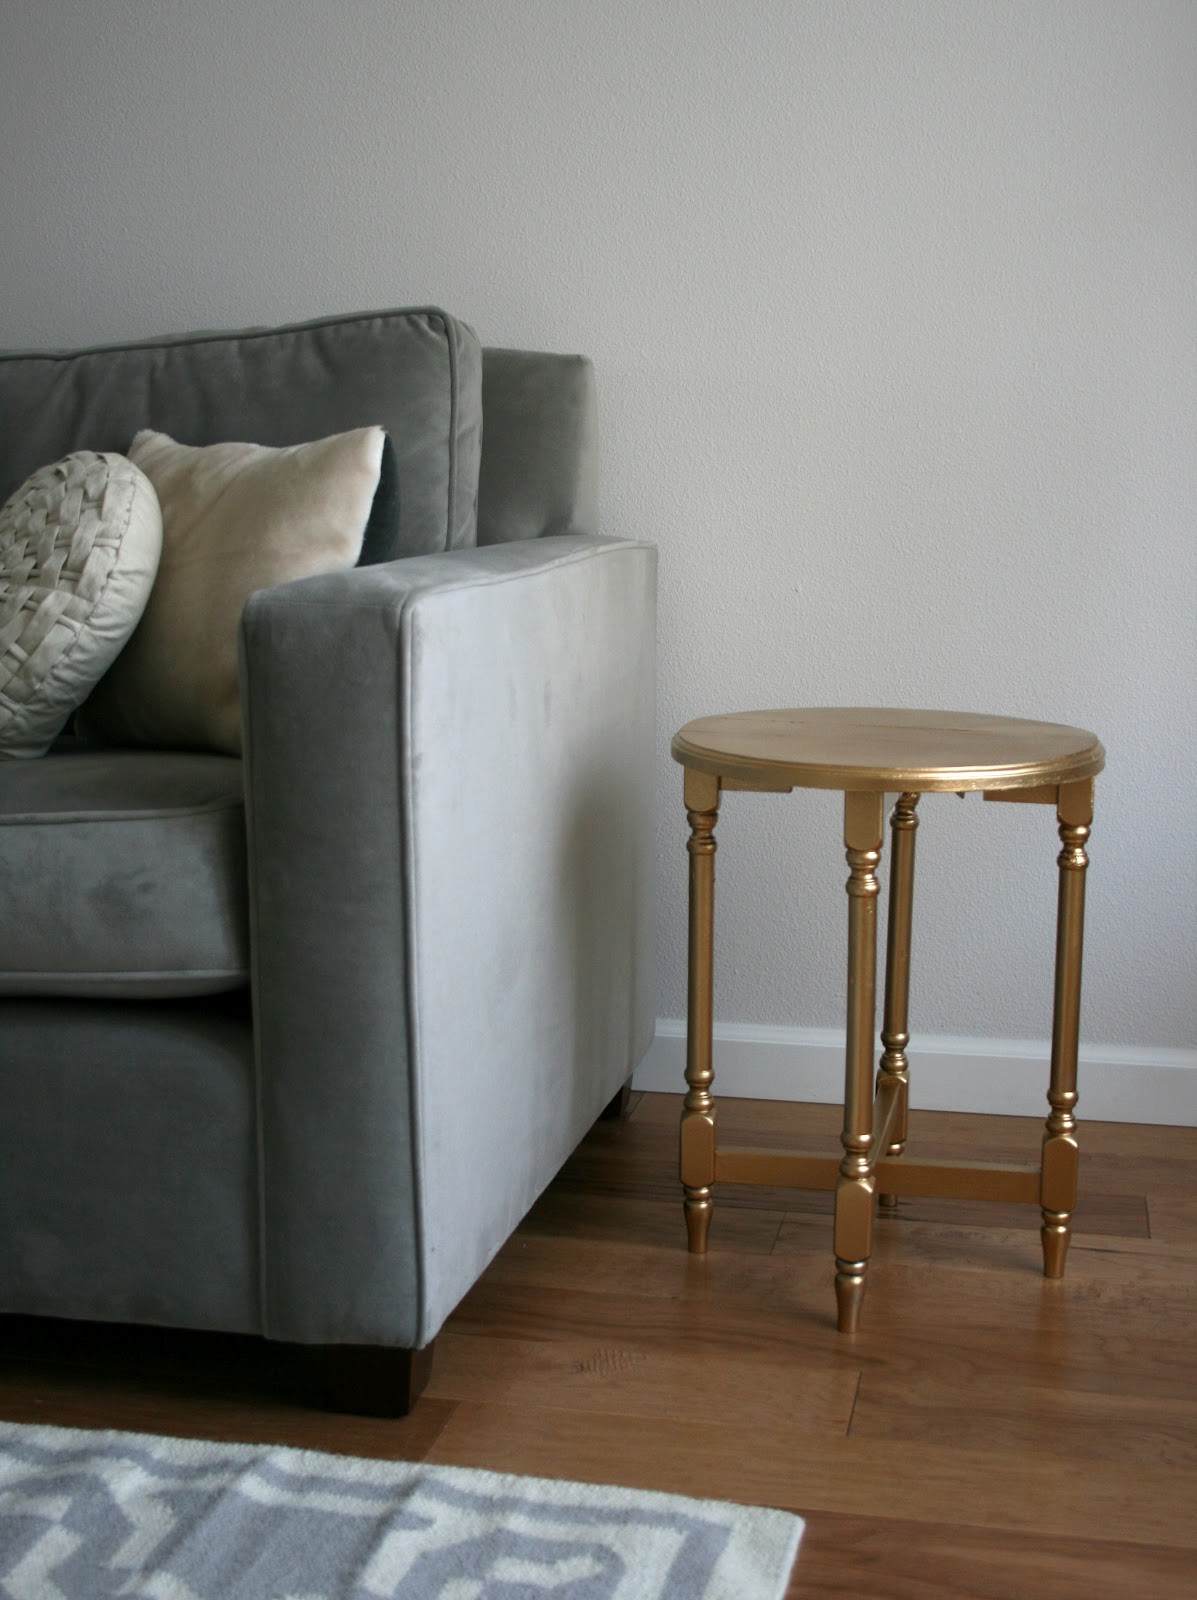 Living Room Furniture Update with Spray Paint